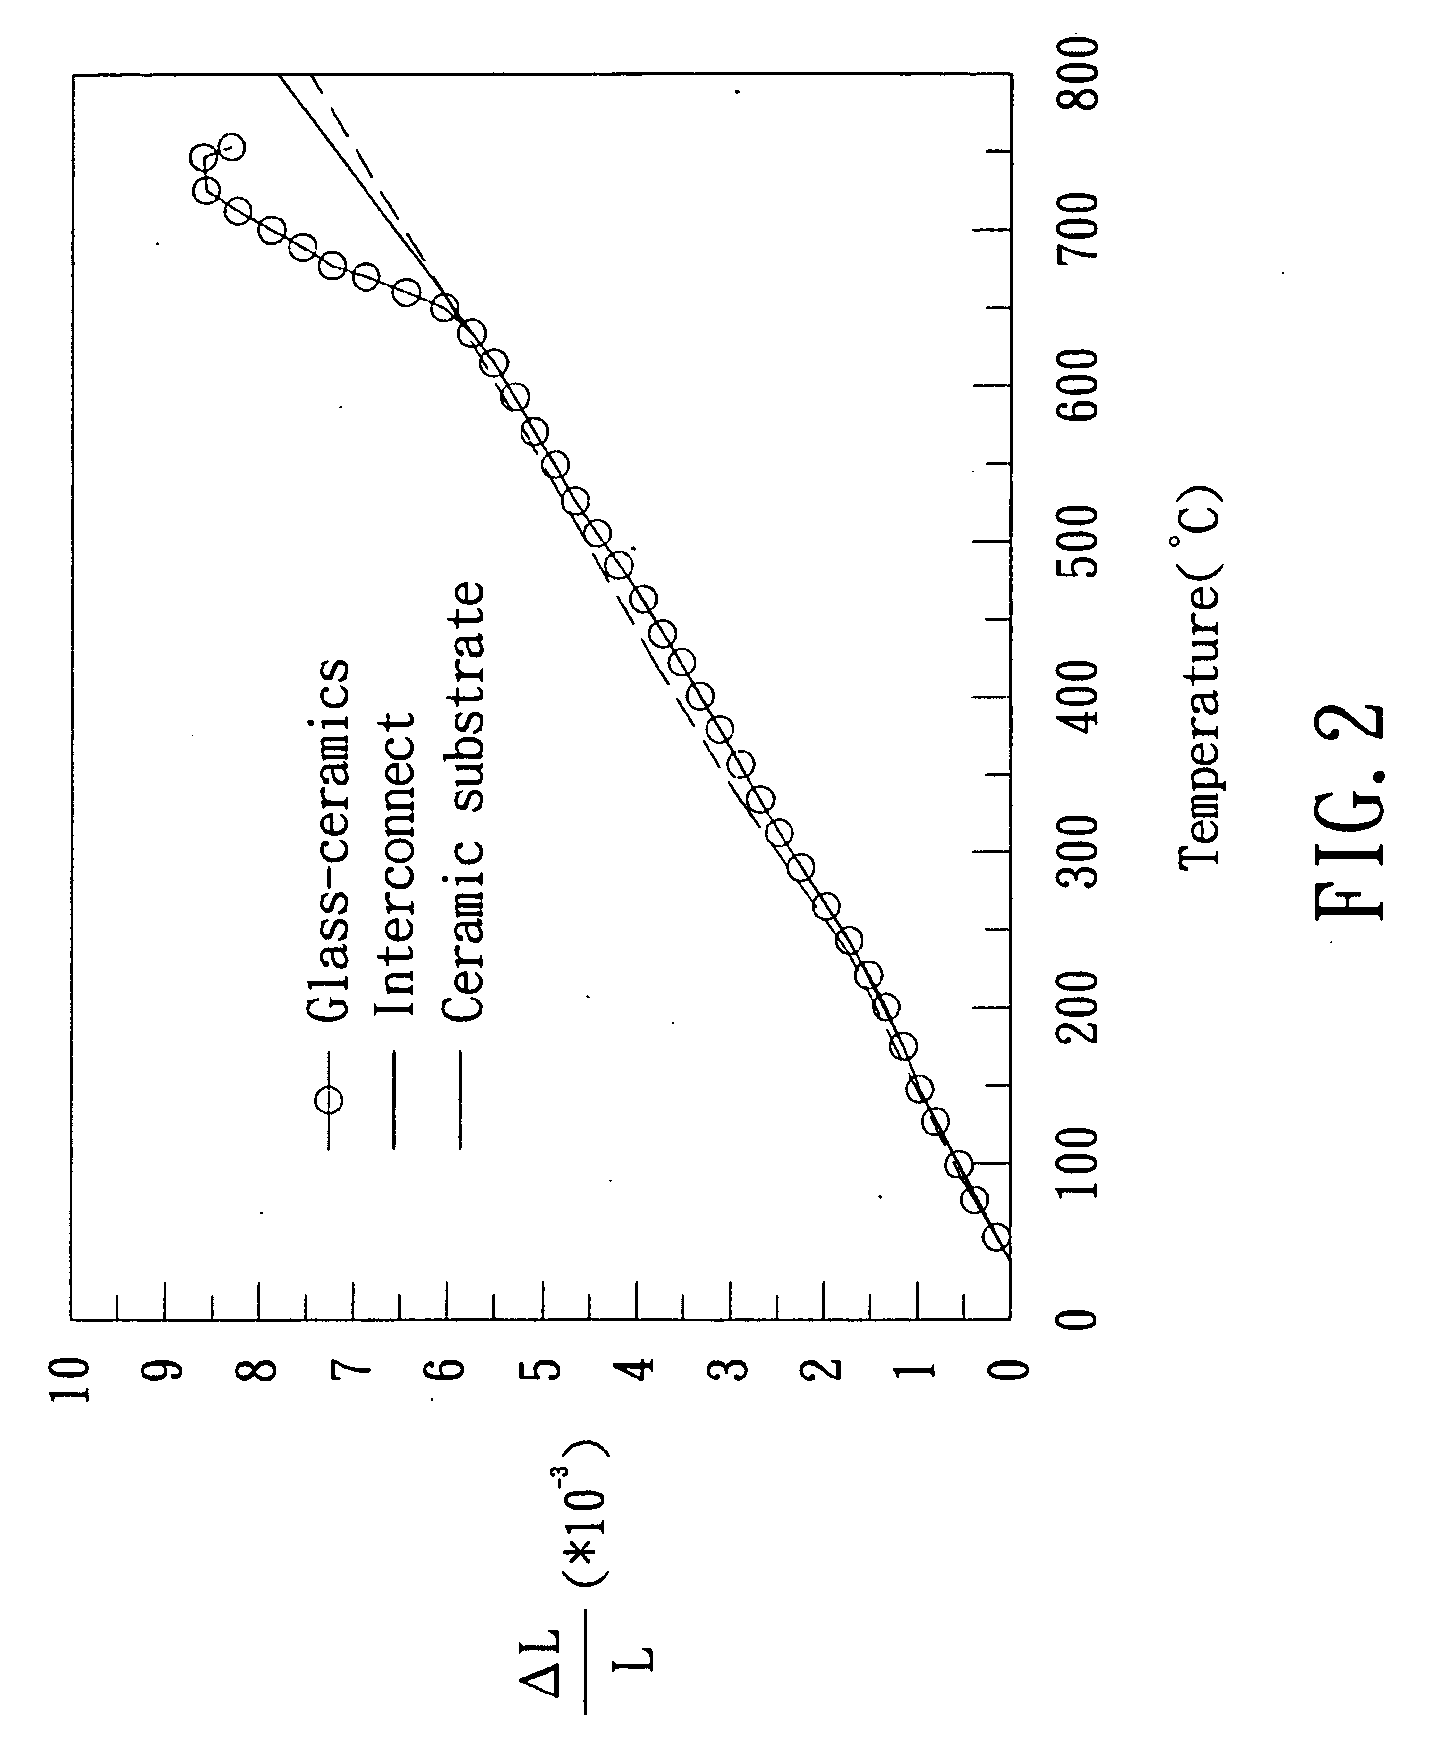 Sealing material for solid oxide fuel cells